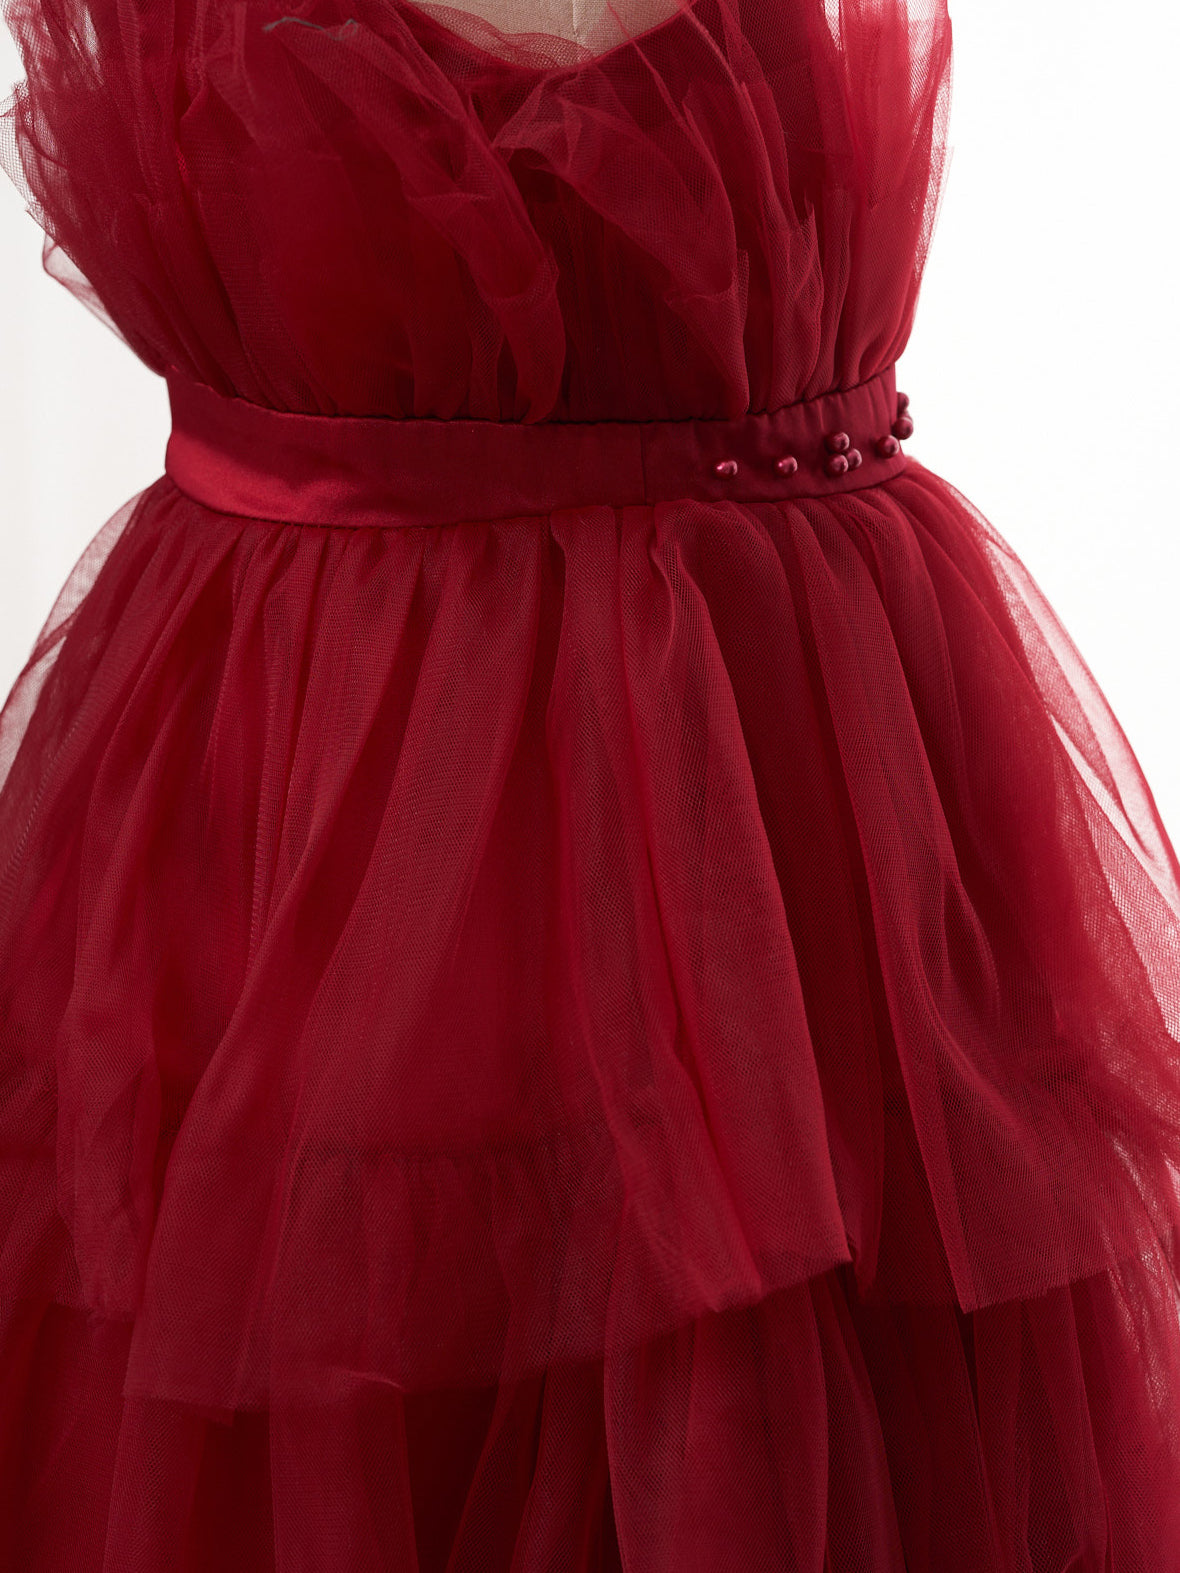 Kate Red Tulle Princess Kids Dress for Photography